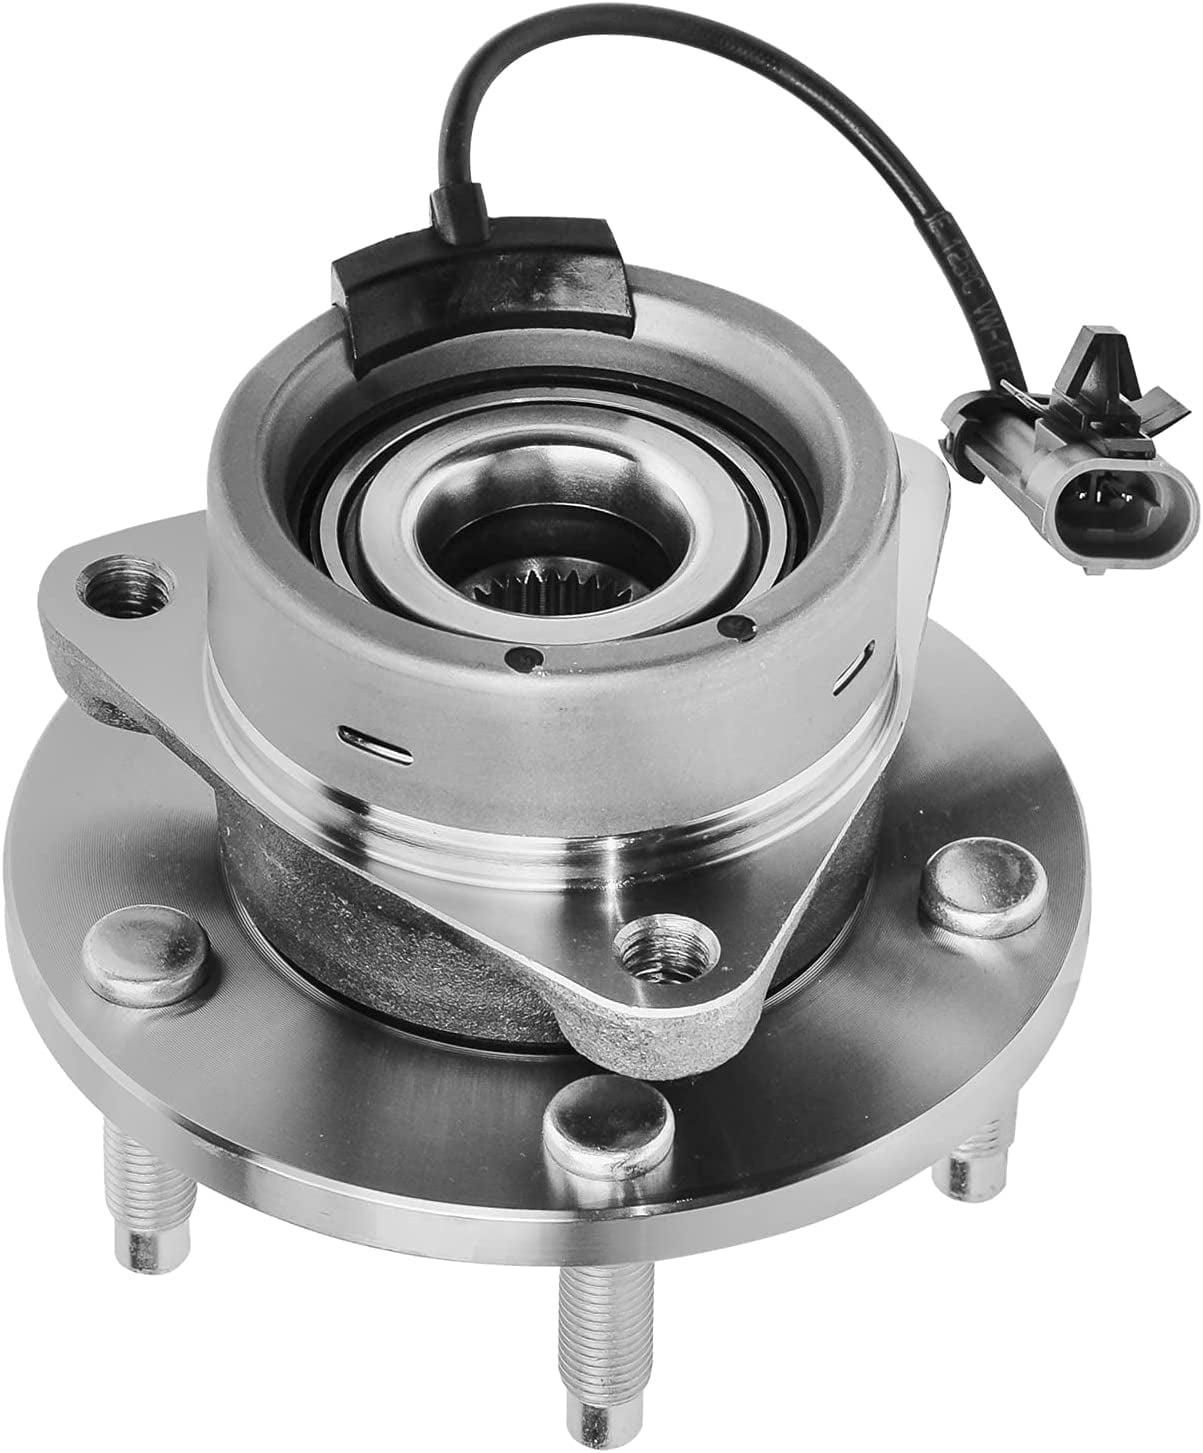 Bodeman w/ABS, Exc. Classic SS Model Pair 2 Front Wheel Hub and Bearing Assembly for 04-12 Chevy Malibu / 05-10 Pontiac G6 w/ABS/ 07-09 Saturn Aura/ 08-10 Chevy HHR and Cobalt 